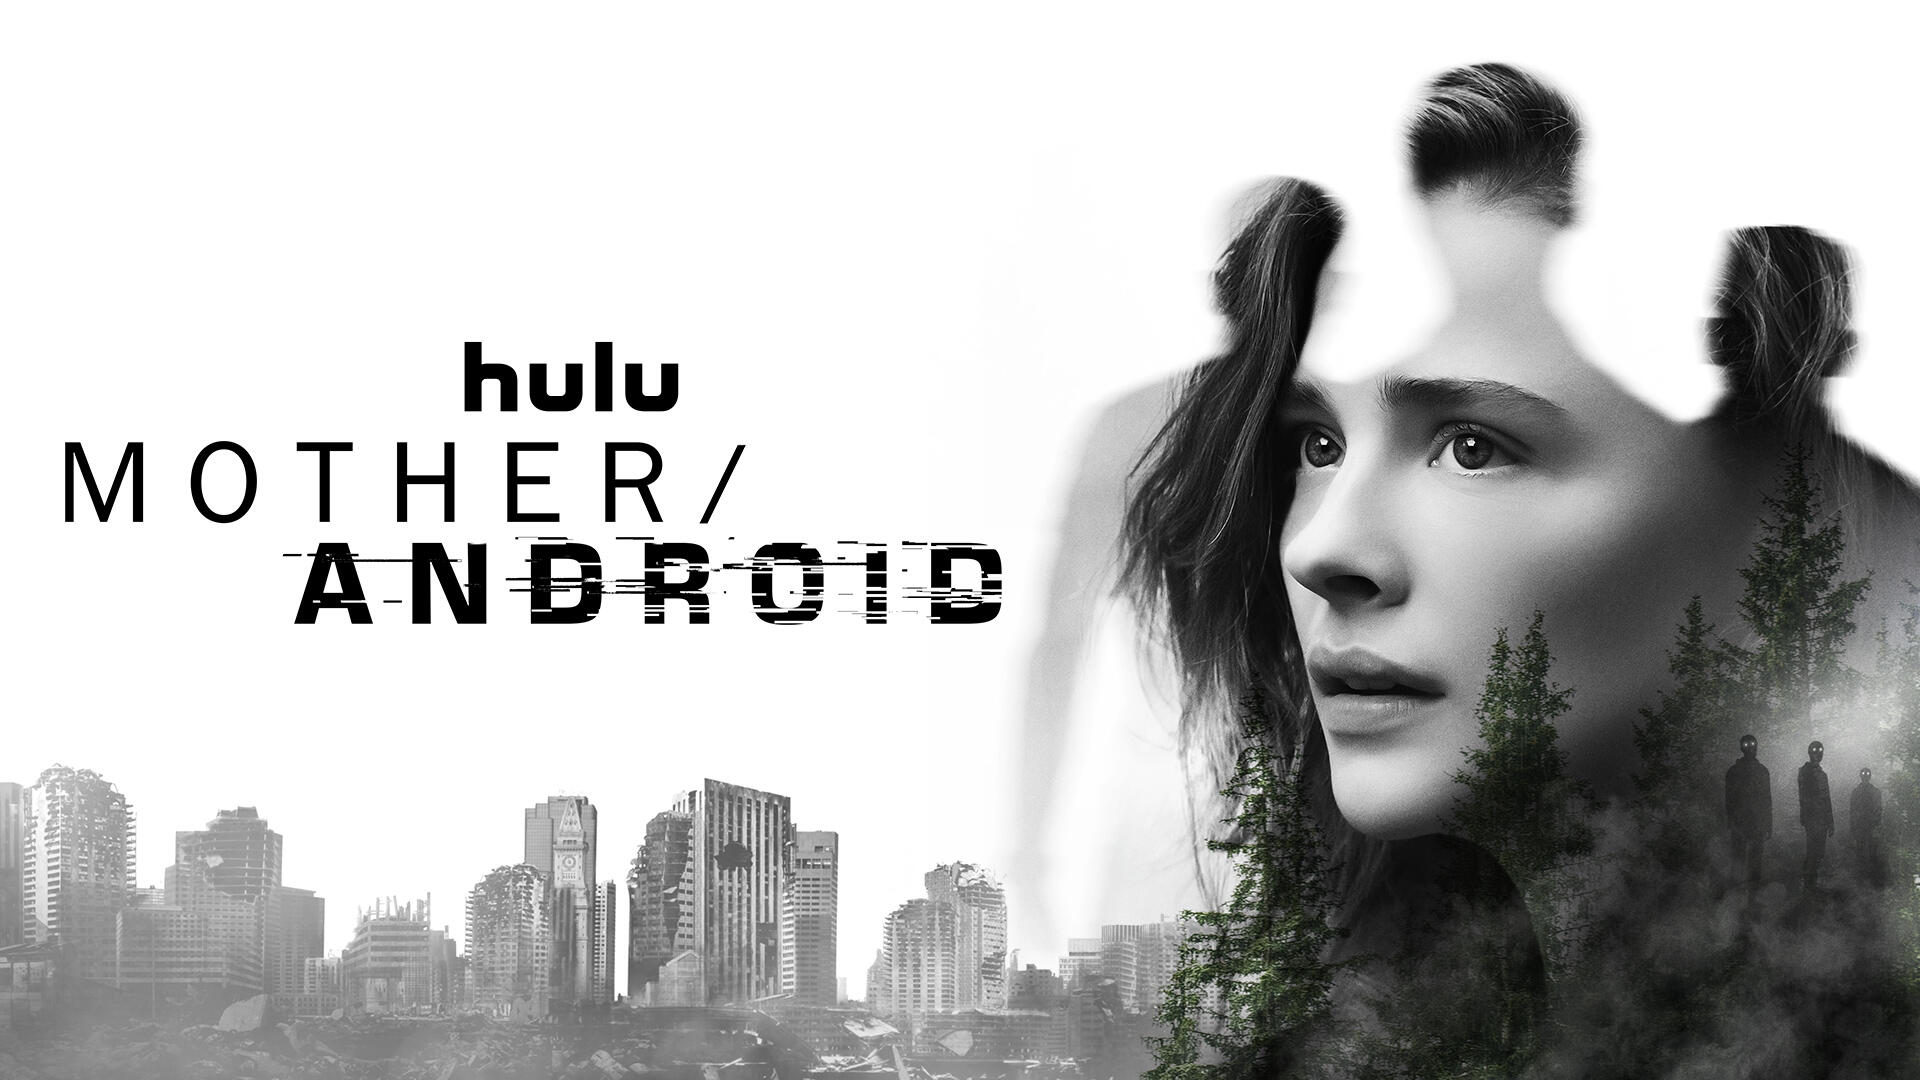 Mother/Android -- Set in the near future, “Mother/Android” follows Georgia (Chloë Grace Moretz) and her boyfriend Sam (Algee Smith) through their treacherous journey of escape as their country is caught in an unexpected war with artificial intelligence. Days away from the arrival of their first child, they must face No Man’s Land – a stronghold of the android uprising, in hopes of reaching safety before giving birth. Georgia (Chloë Grace Moretz), shown. (Courtesy of Hulu)